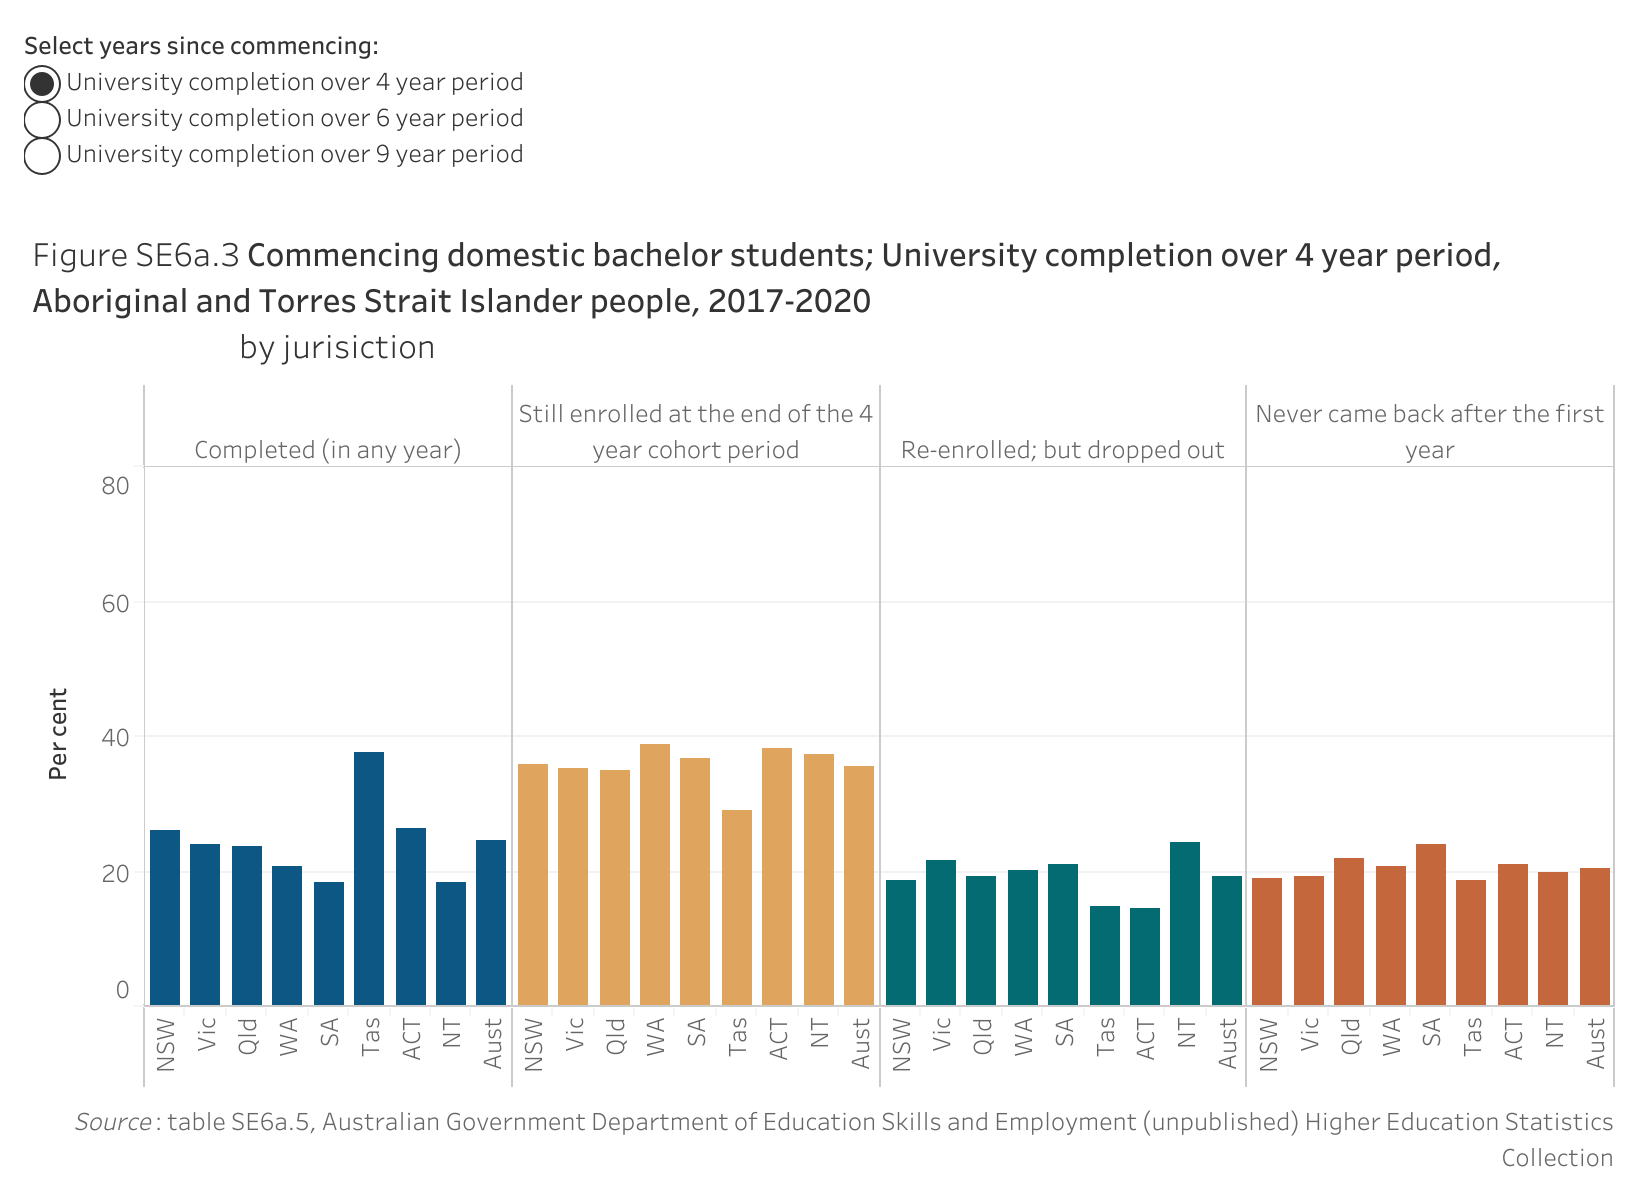 Figure SE6a.3. Bar chart showing proportion of Aboriginal and Torres Strait Islander commencing domestic bachelor students who had completed university over a 4-year period (2017-2020), by completion status and by jurisdiction. Data table of figure of SE6.a3 is below.